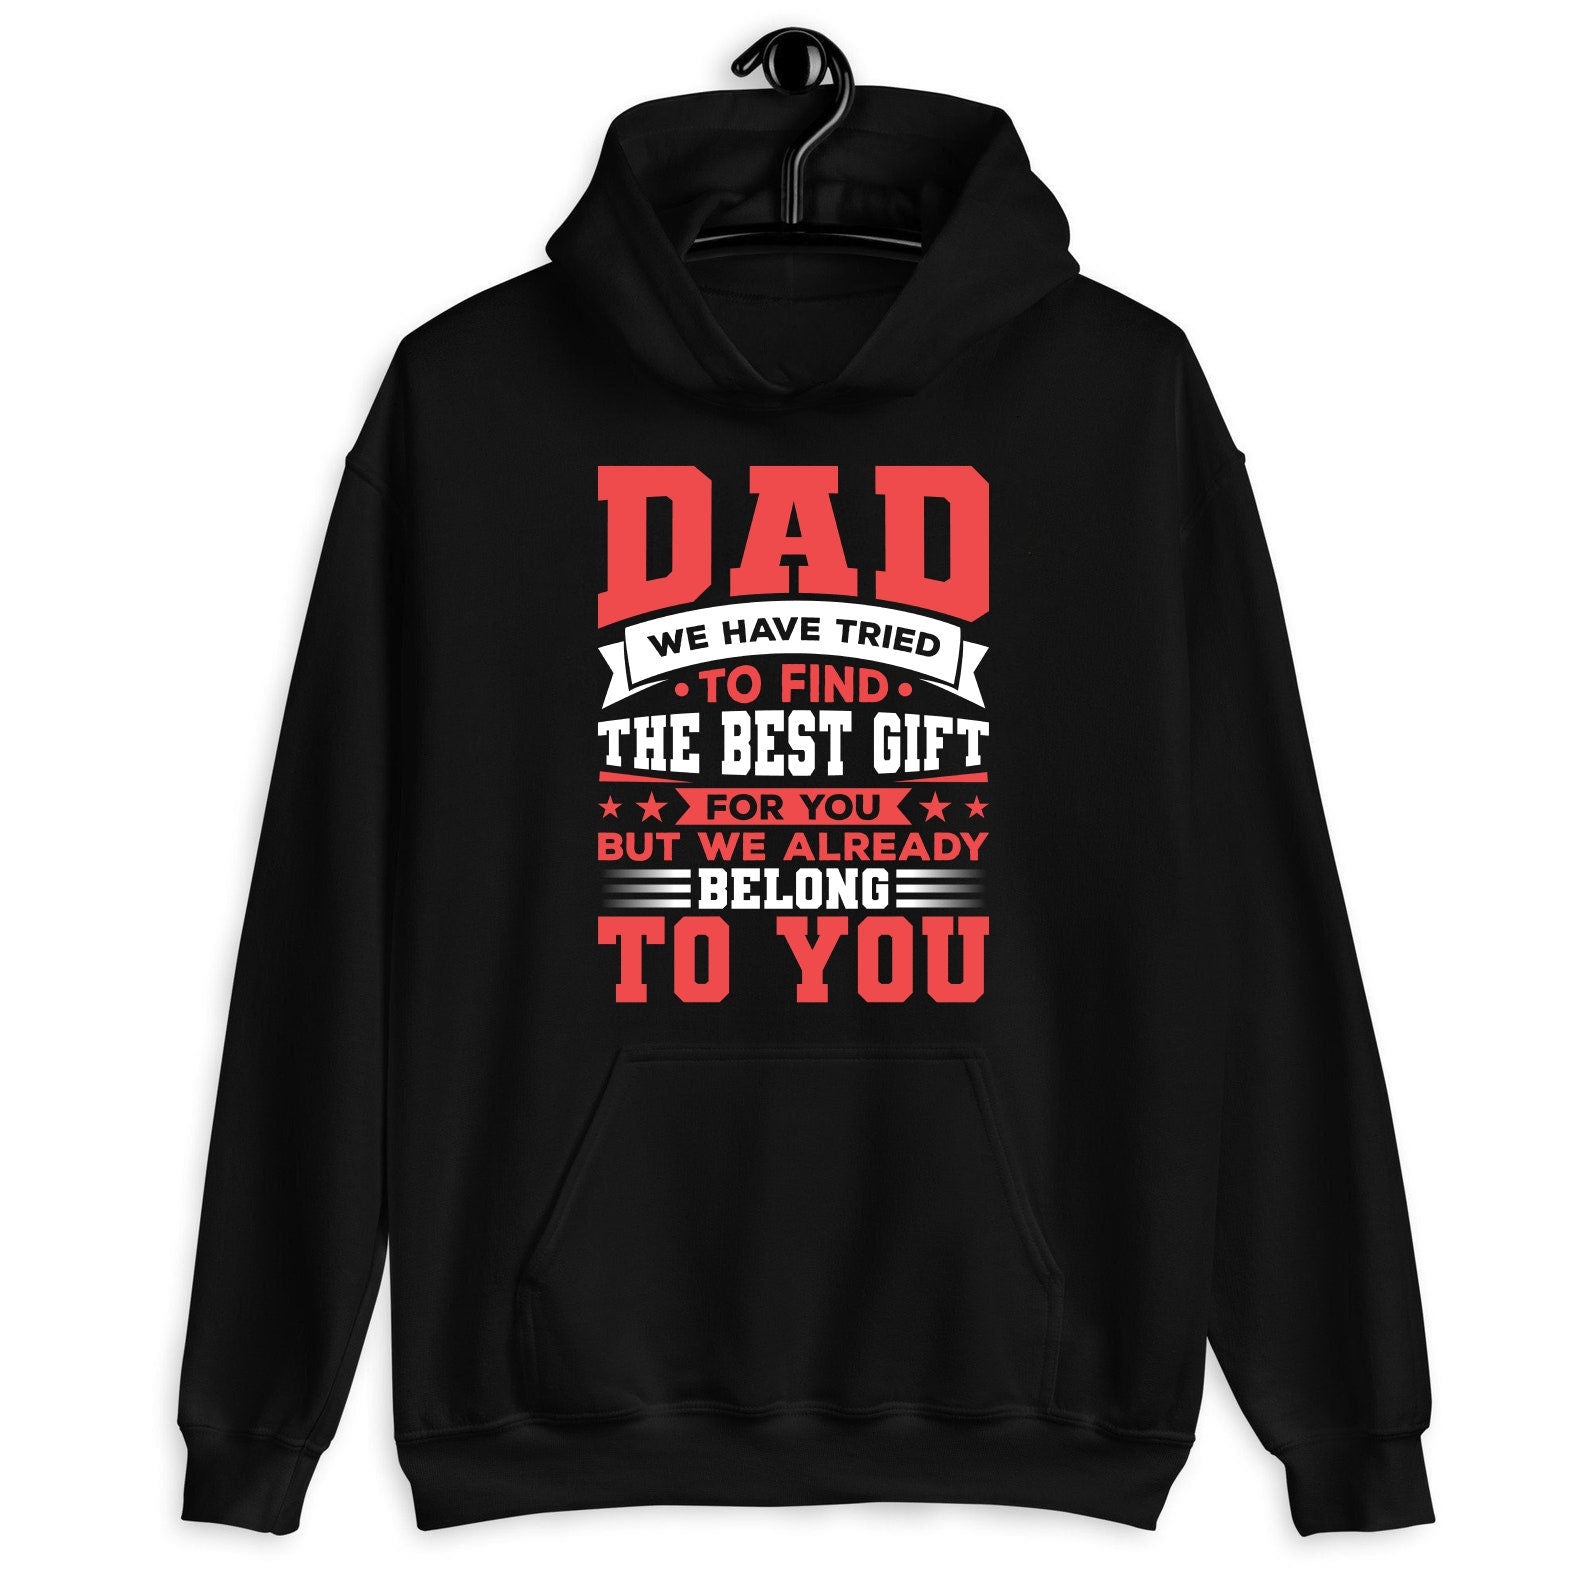 Dad We Have Tried To Find The Best Gift For You But We Already Belong To You Shirt, Best Fathers Shirt